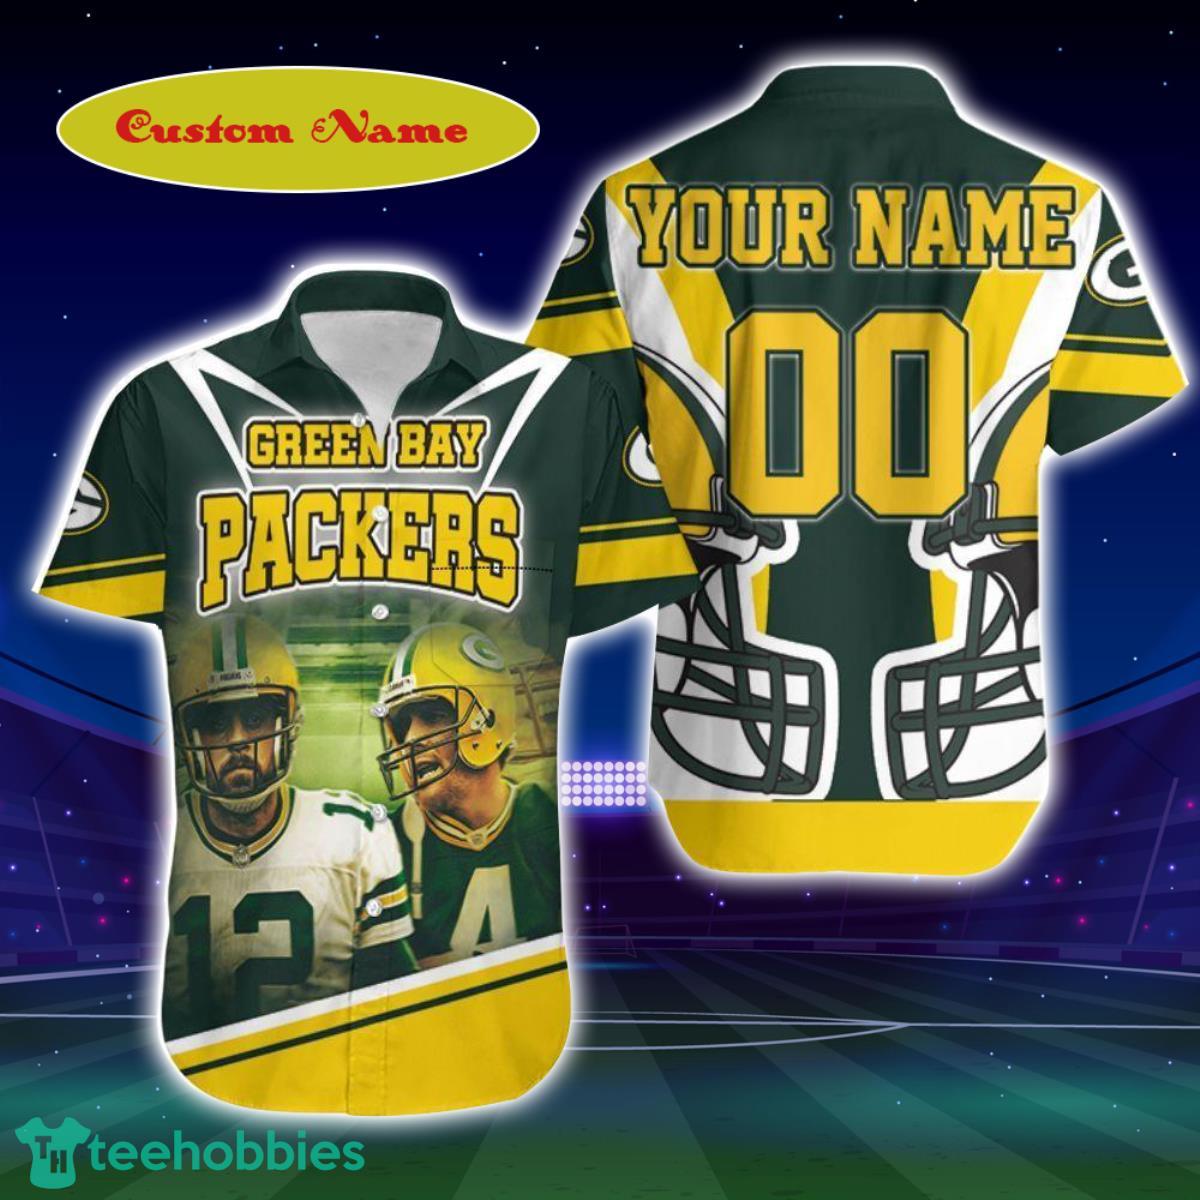 Green Bay Packers Aaron Rodgers 12 And Brett Favre 4 For Fans Custom Name Hawaiian Shirt Best Gift For Men And Women Product Photo 1